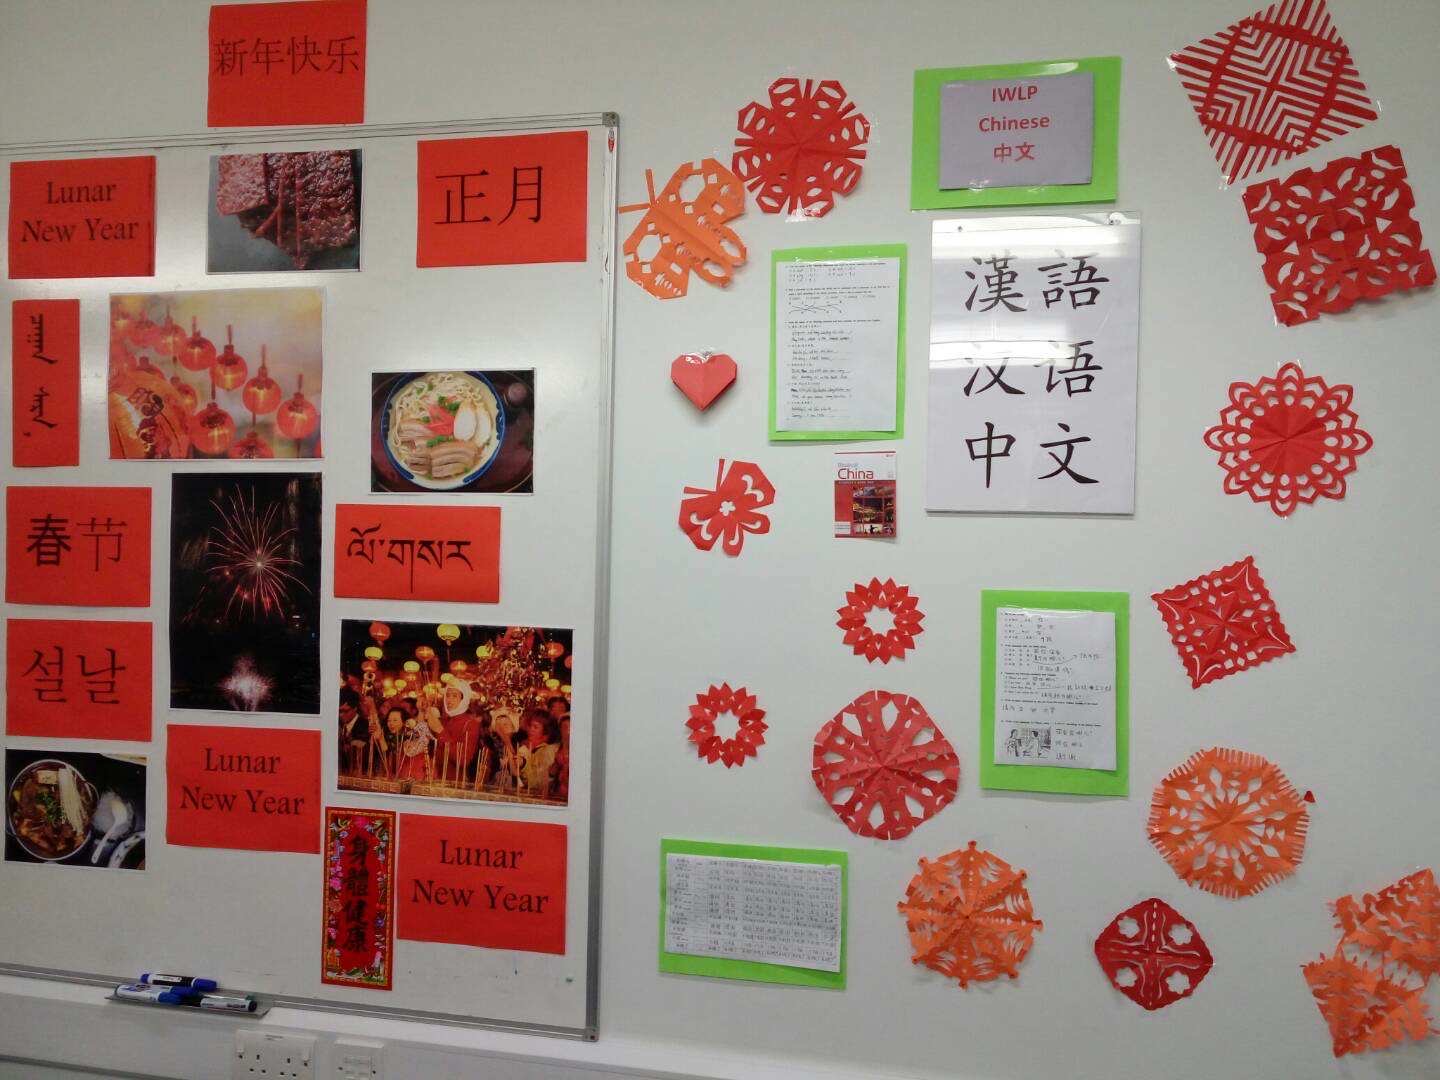 A photograph of a variety of items made during activities for Chinese New Year, including paper cutting and calligraphy